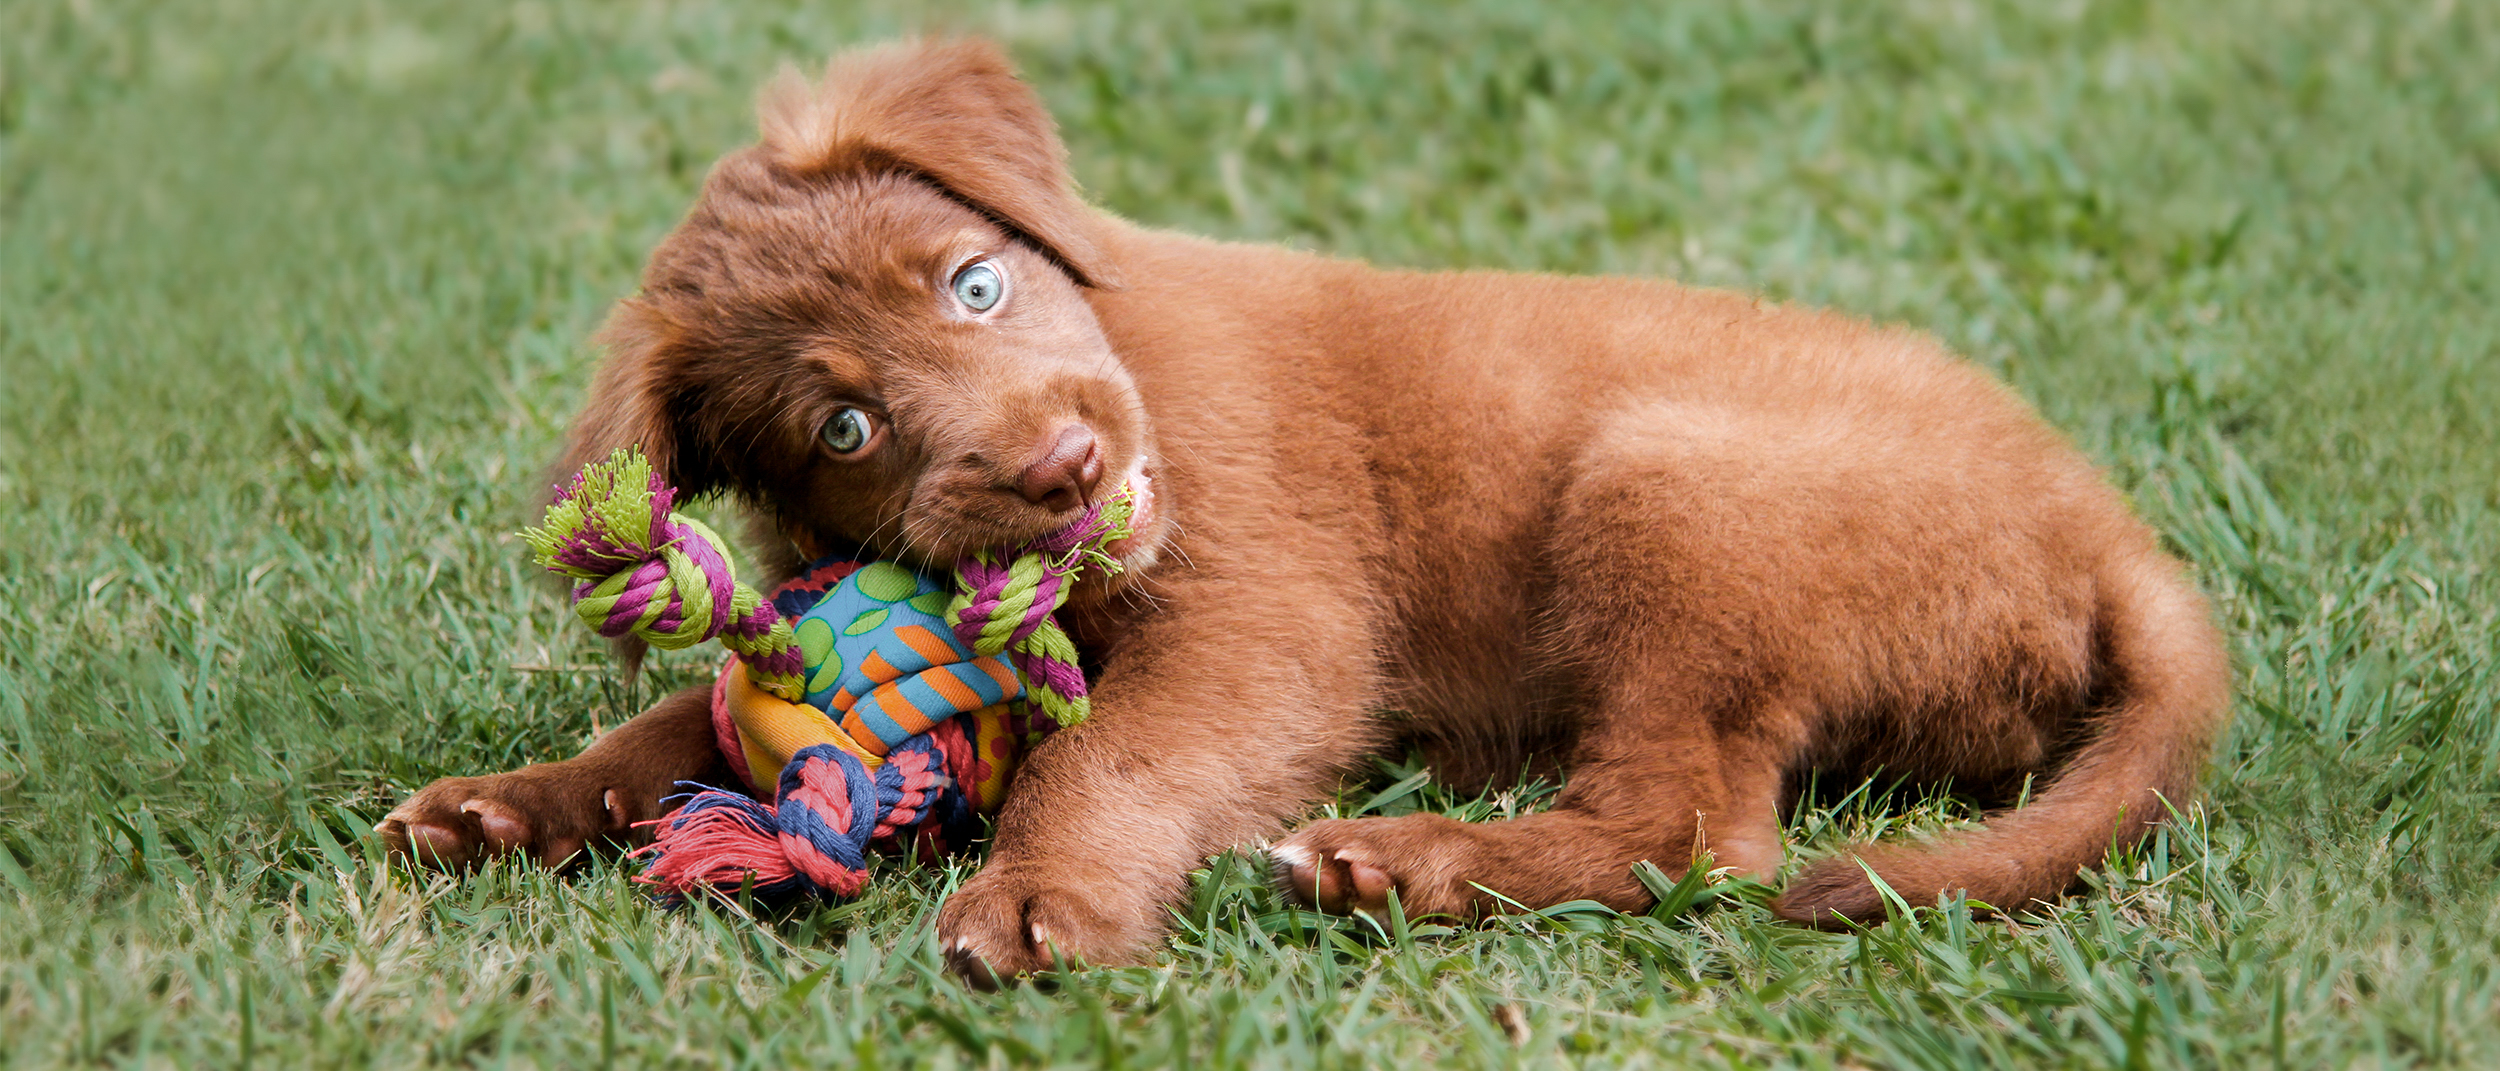 Puppy dog lying down in grass chewing a toy.